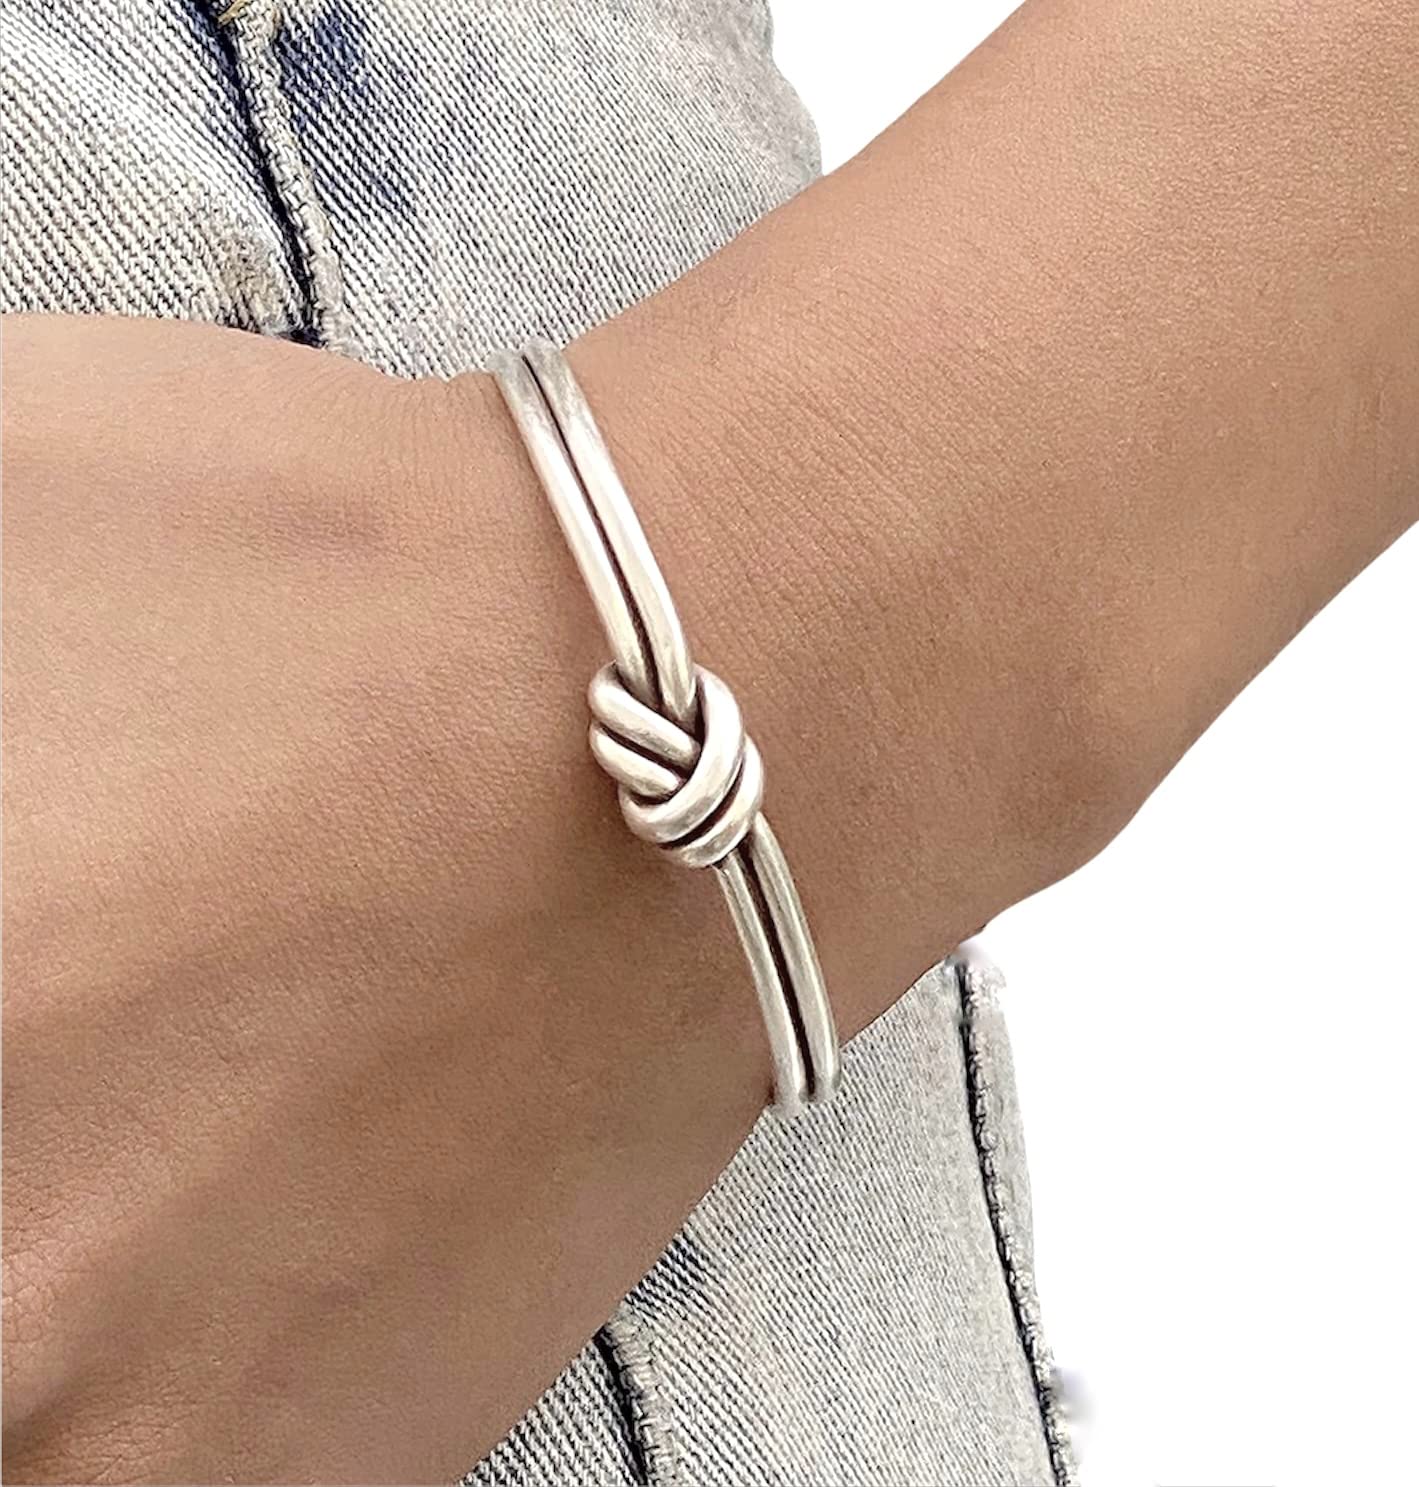 Handmade Sterling Silver Knot Cuff Bracelet, Minimalist Rustic Simple Tied Silver Wires, Adjustable 6 7/8 inches Cuff, Women size M-L, Men size S-M, Gift for Her or Him